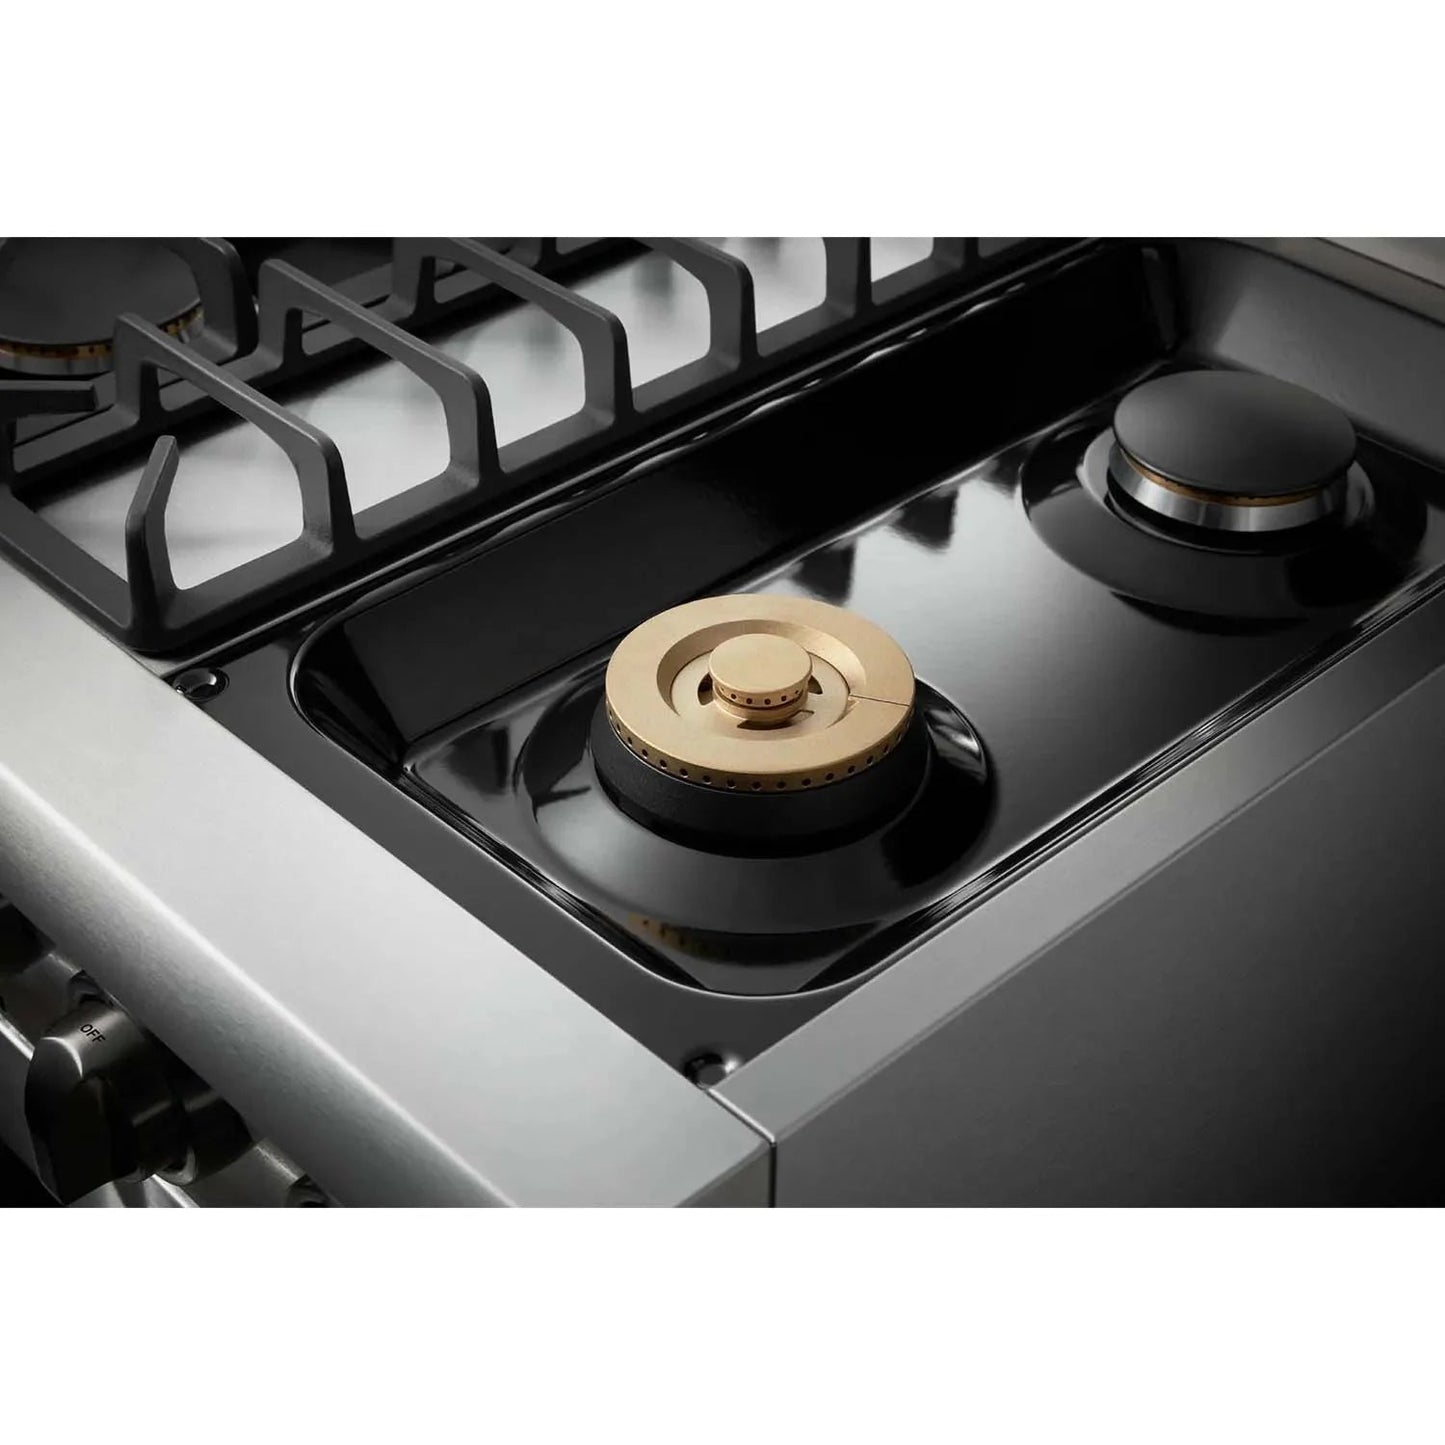 Thor 30 Inch Professional Gas Range In Stainless Steel